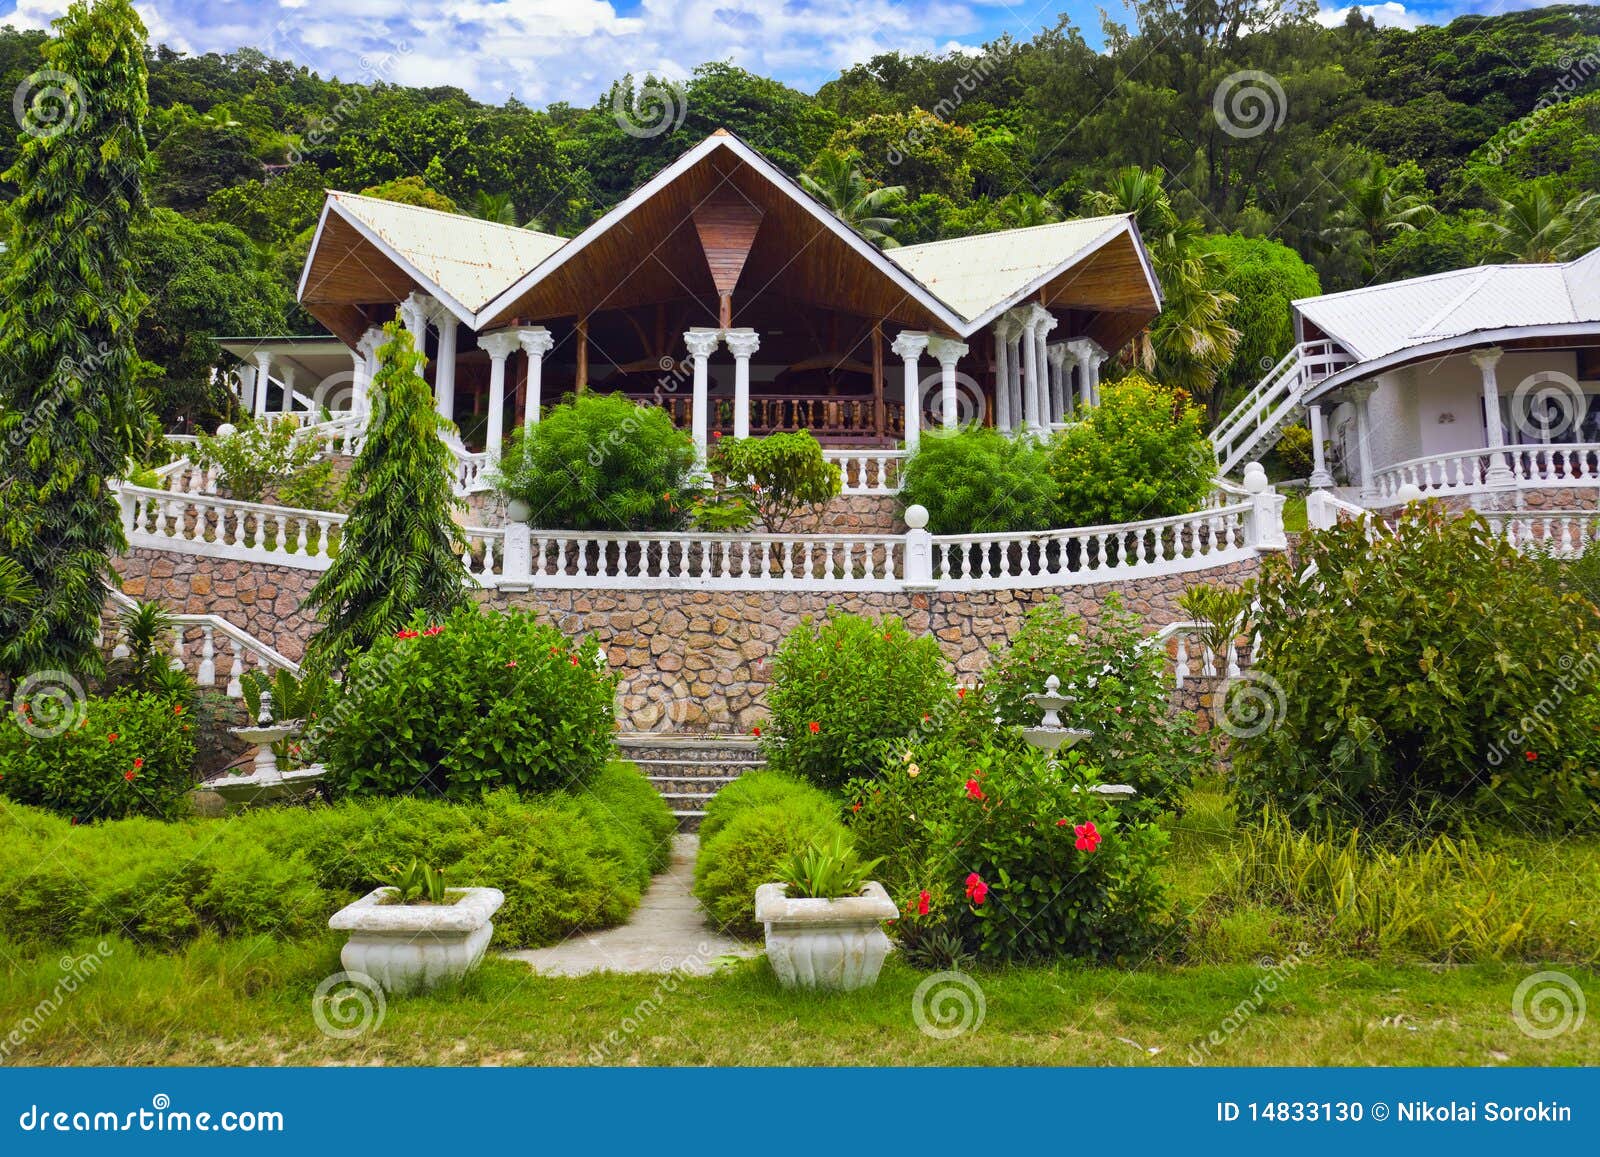 Hotel at Tropical Island, Seychelles Stock Photo - Image of flower ...